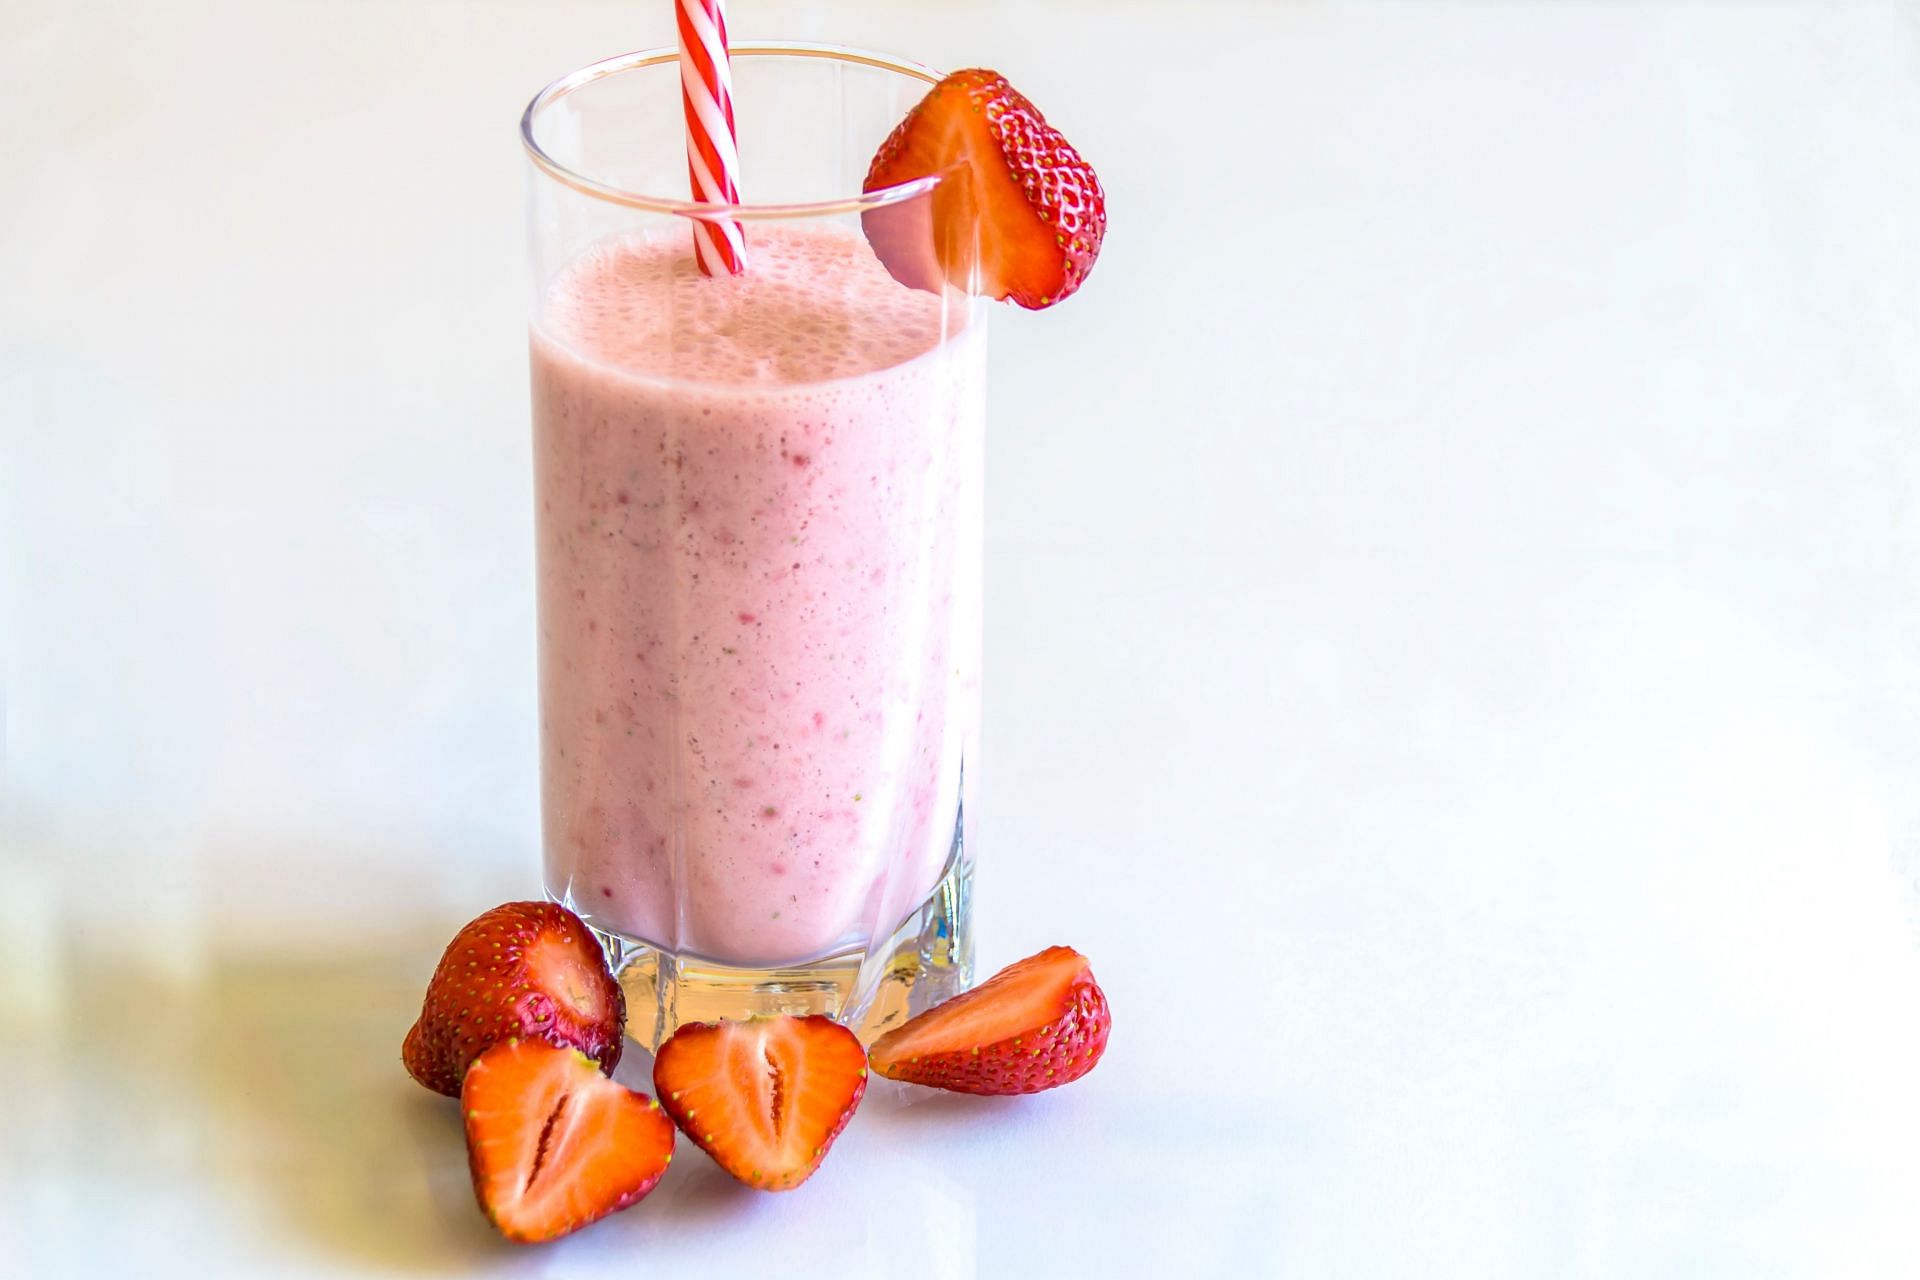 Eating bananas or drinking smoothies is beneficial. (Image via Pexels/Photomix Company)